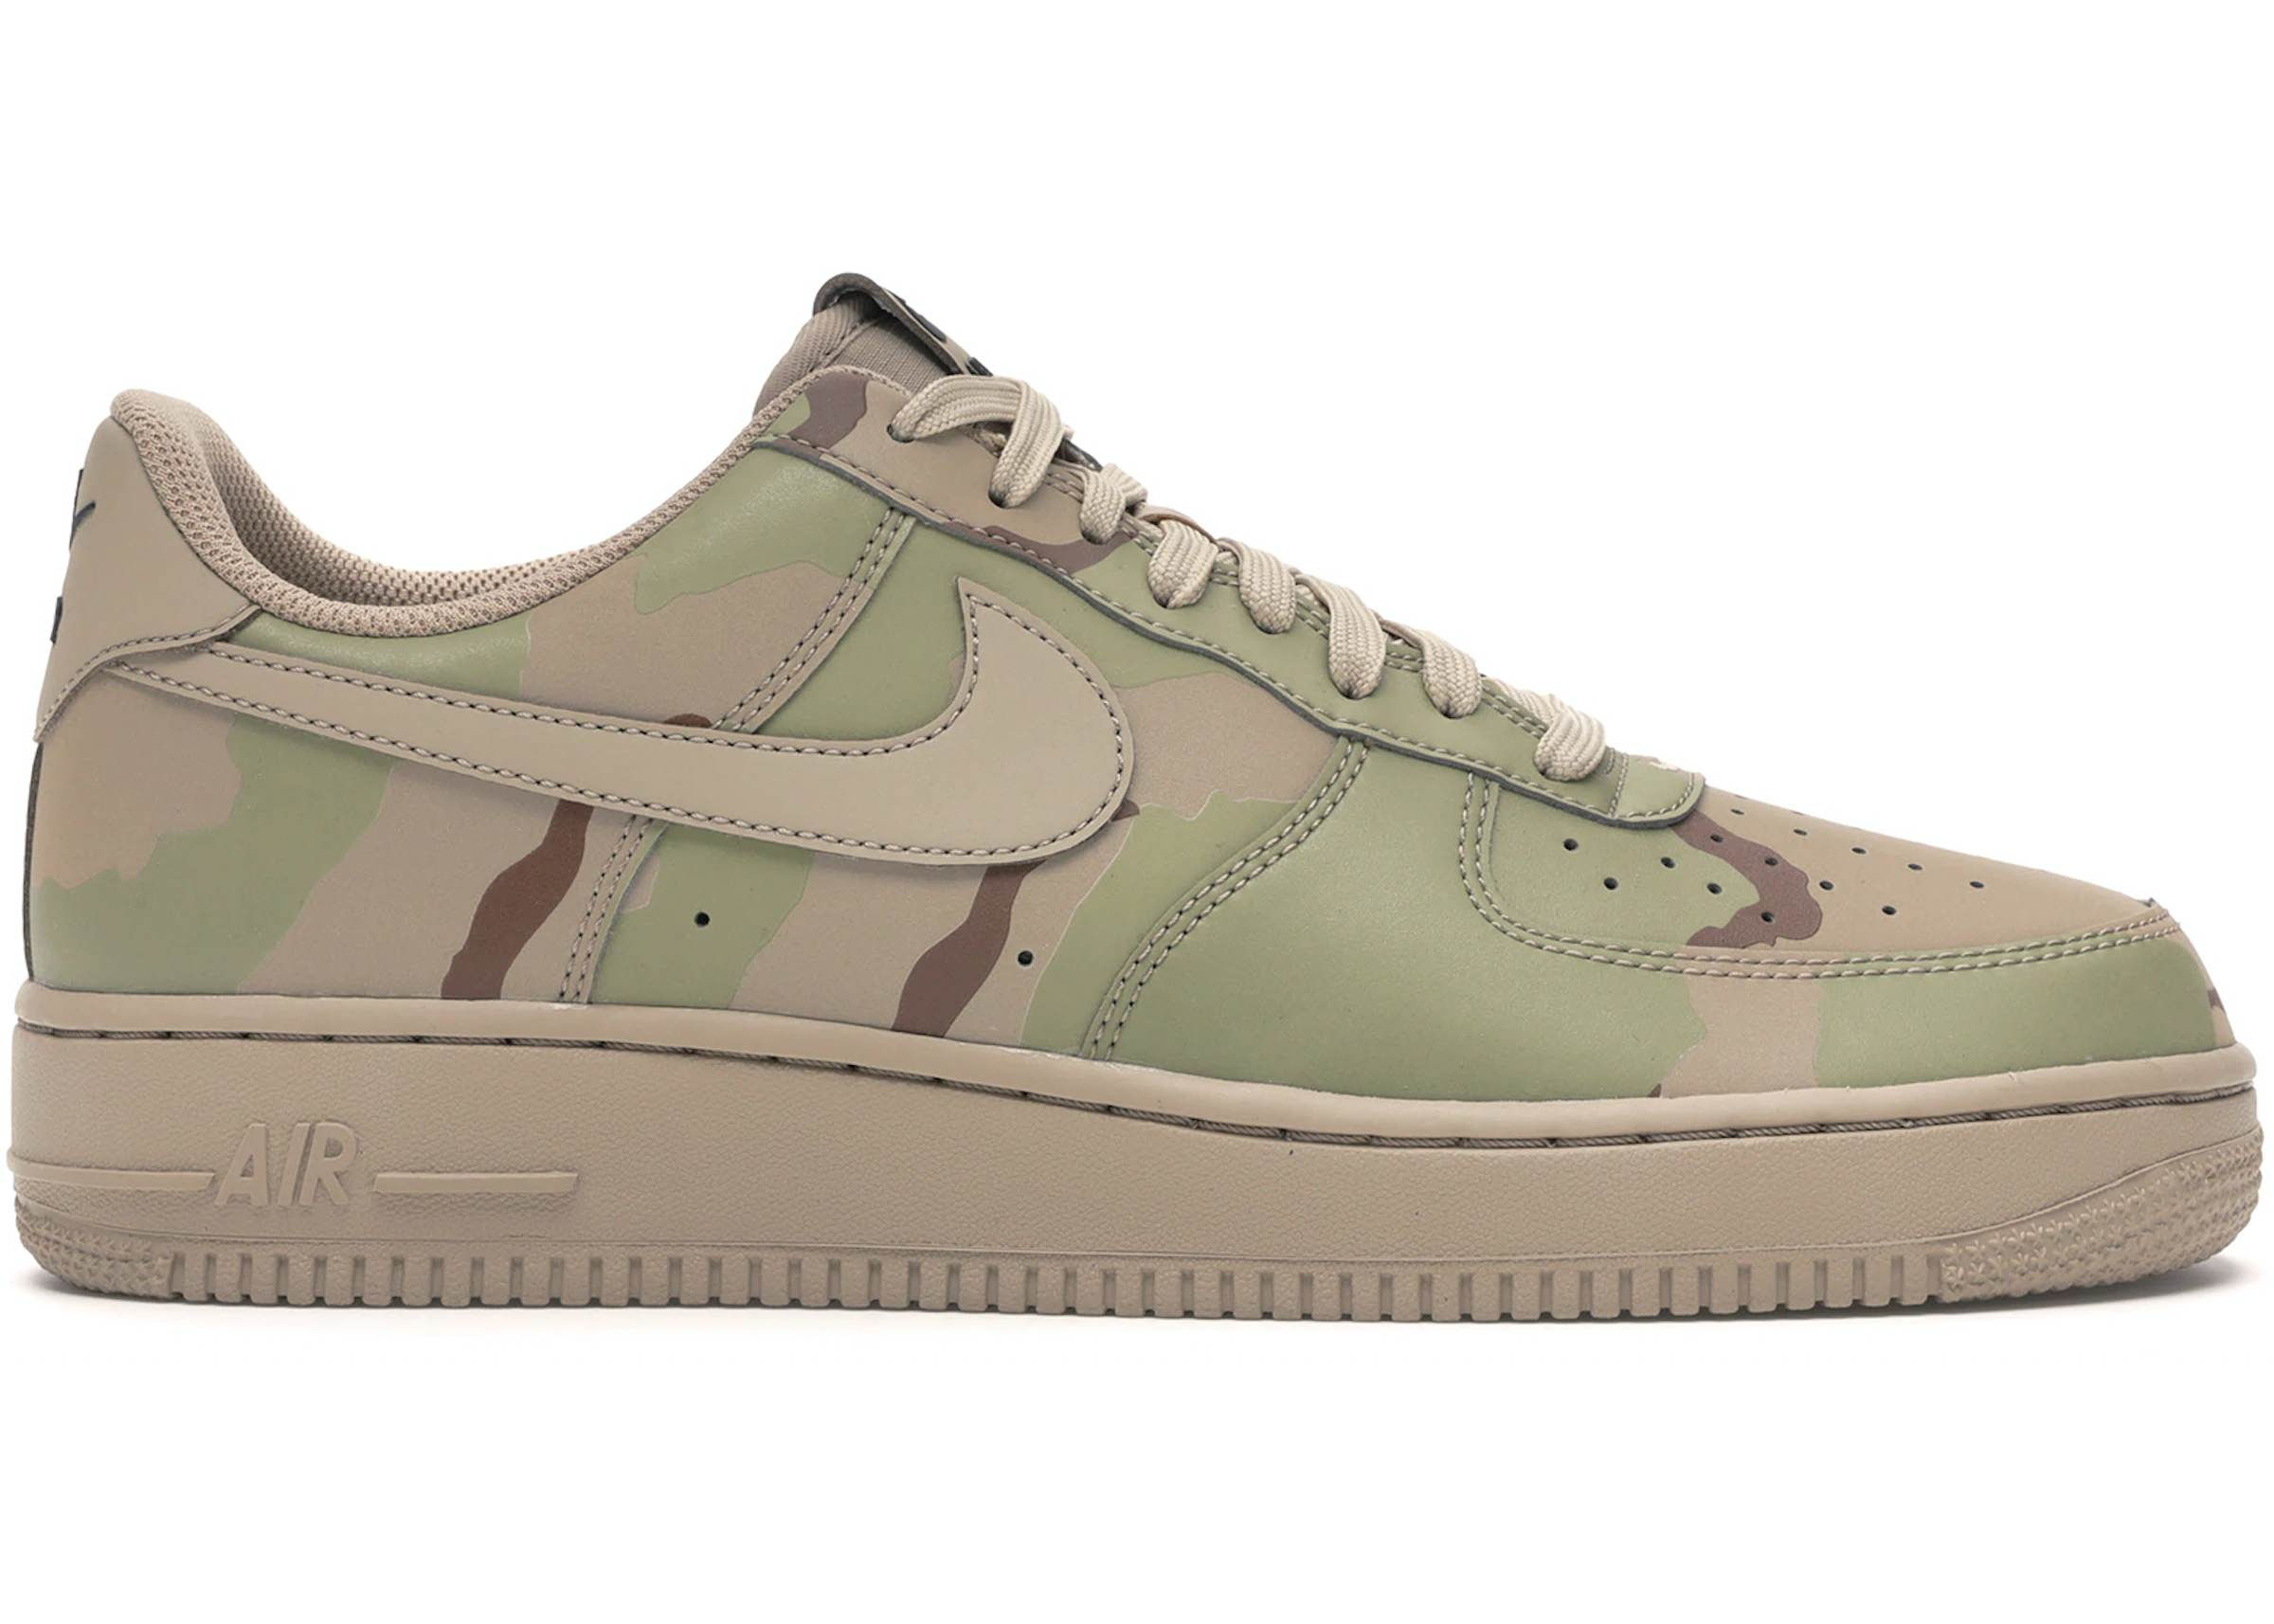 Camo Air Force Ones For Sale | lupon.gov.ph